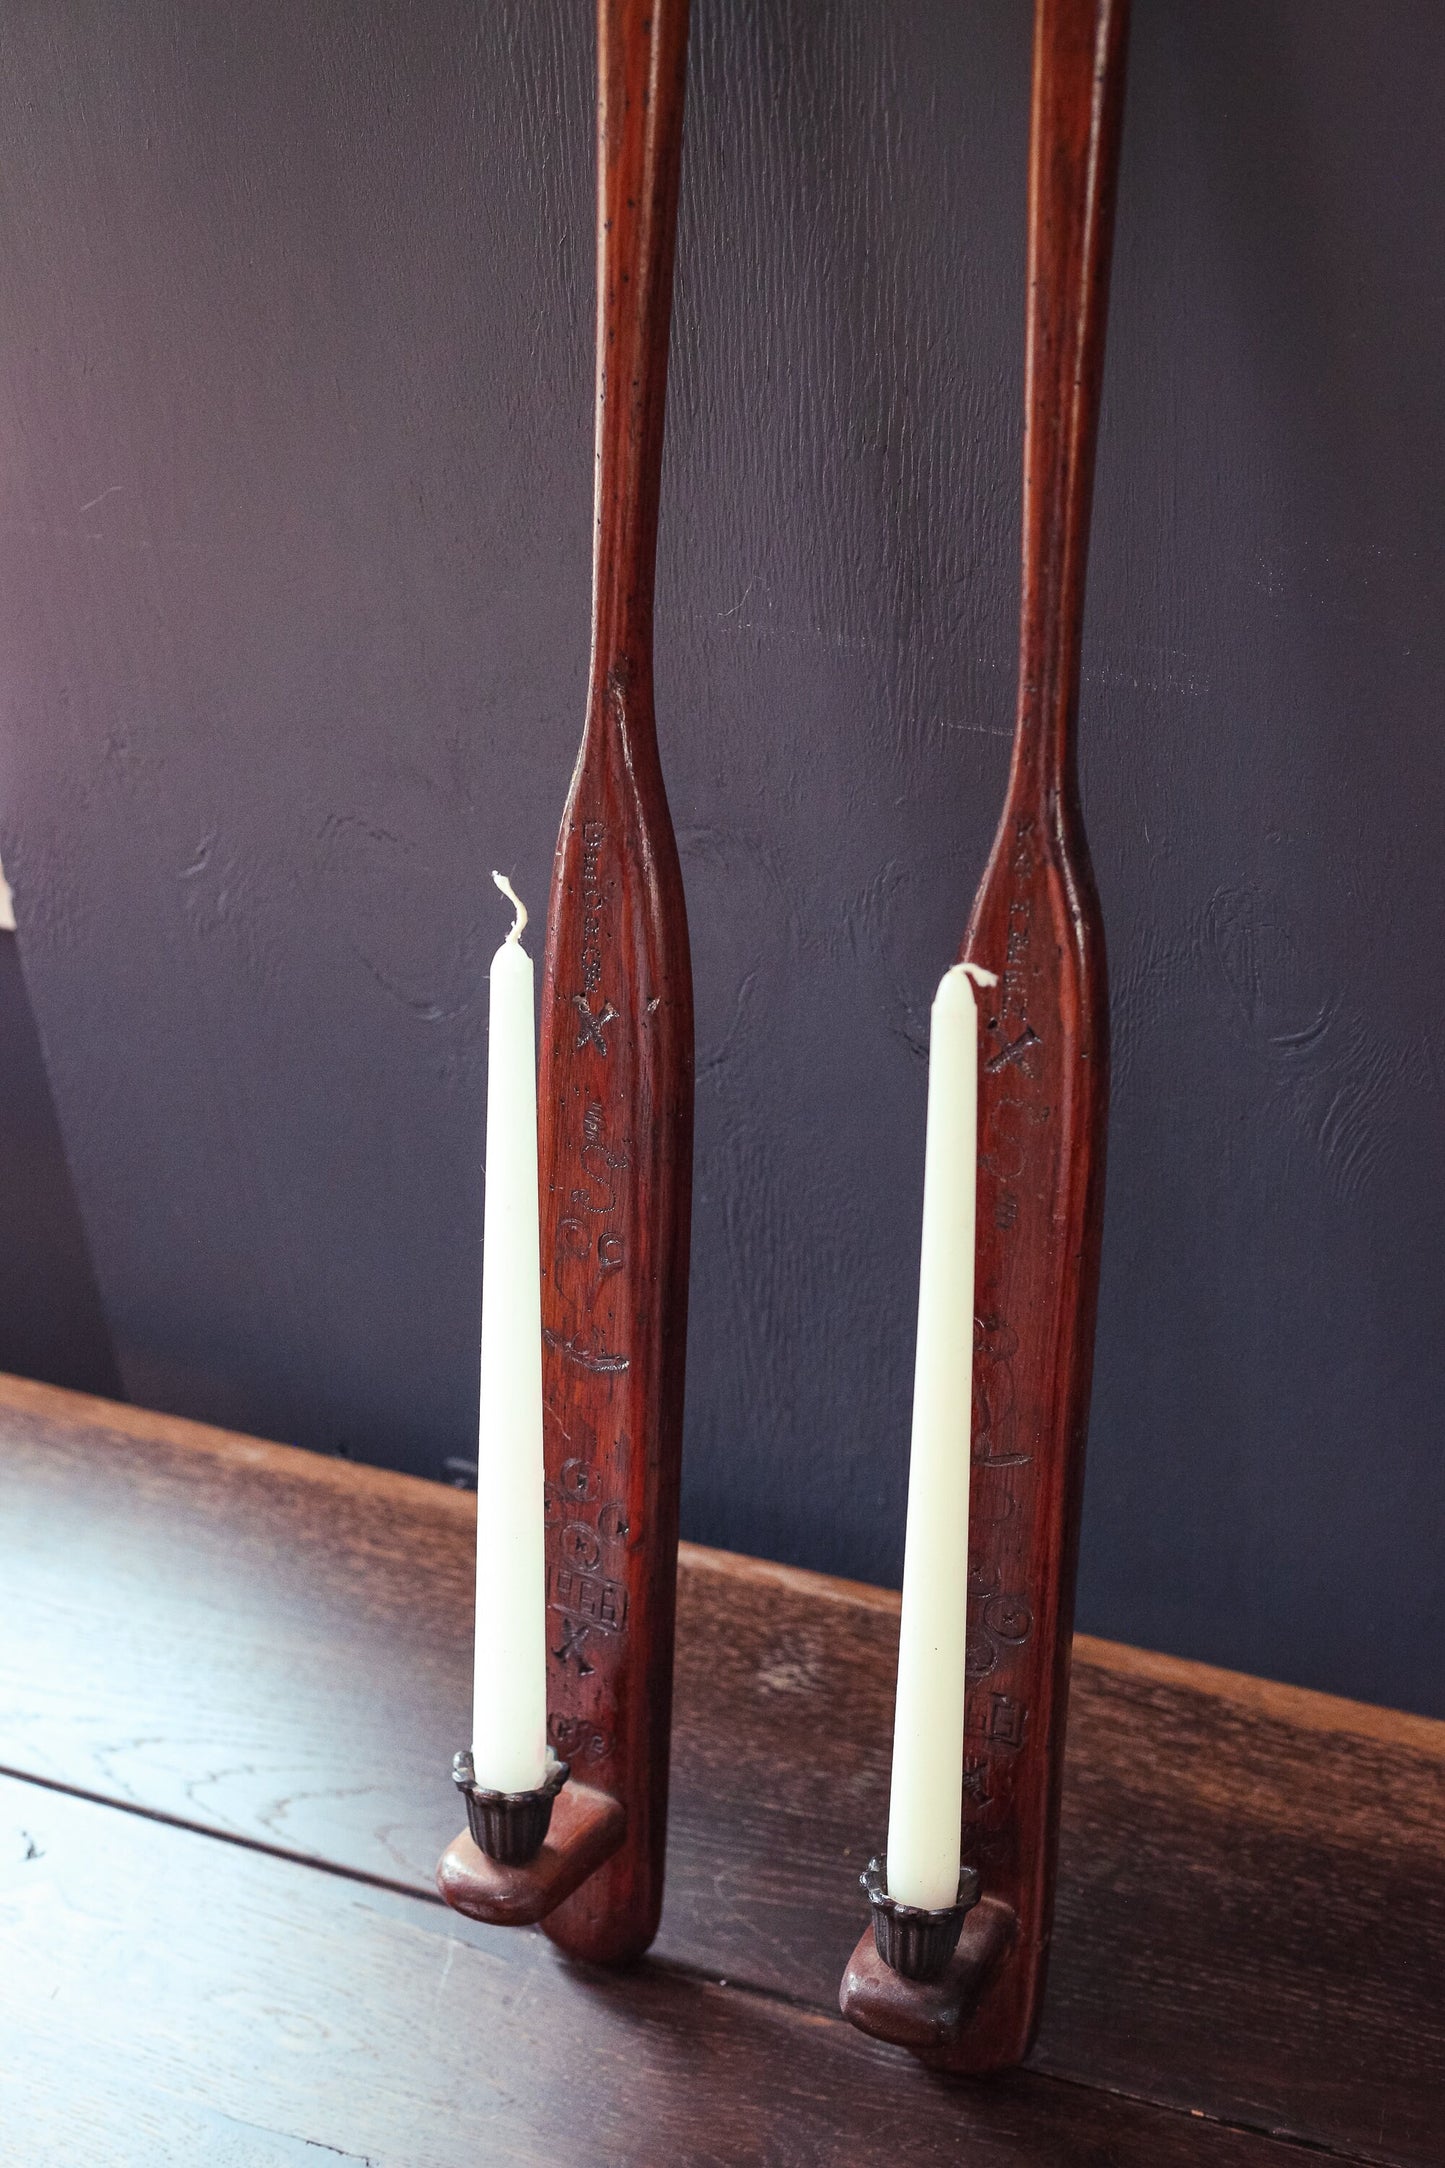 Vintage Wall Candle Holder Pledge Paddle in Wood & Metal - Unique Hand Carved Wooden Wall Candle Holder